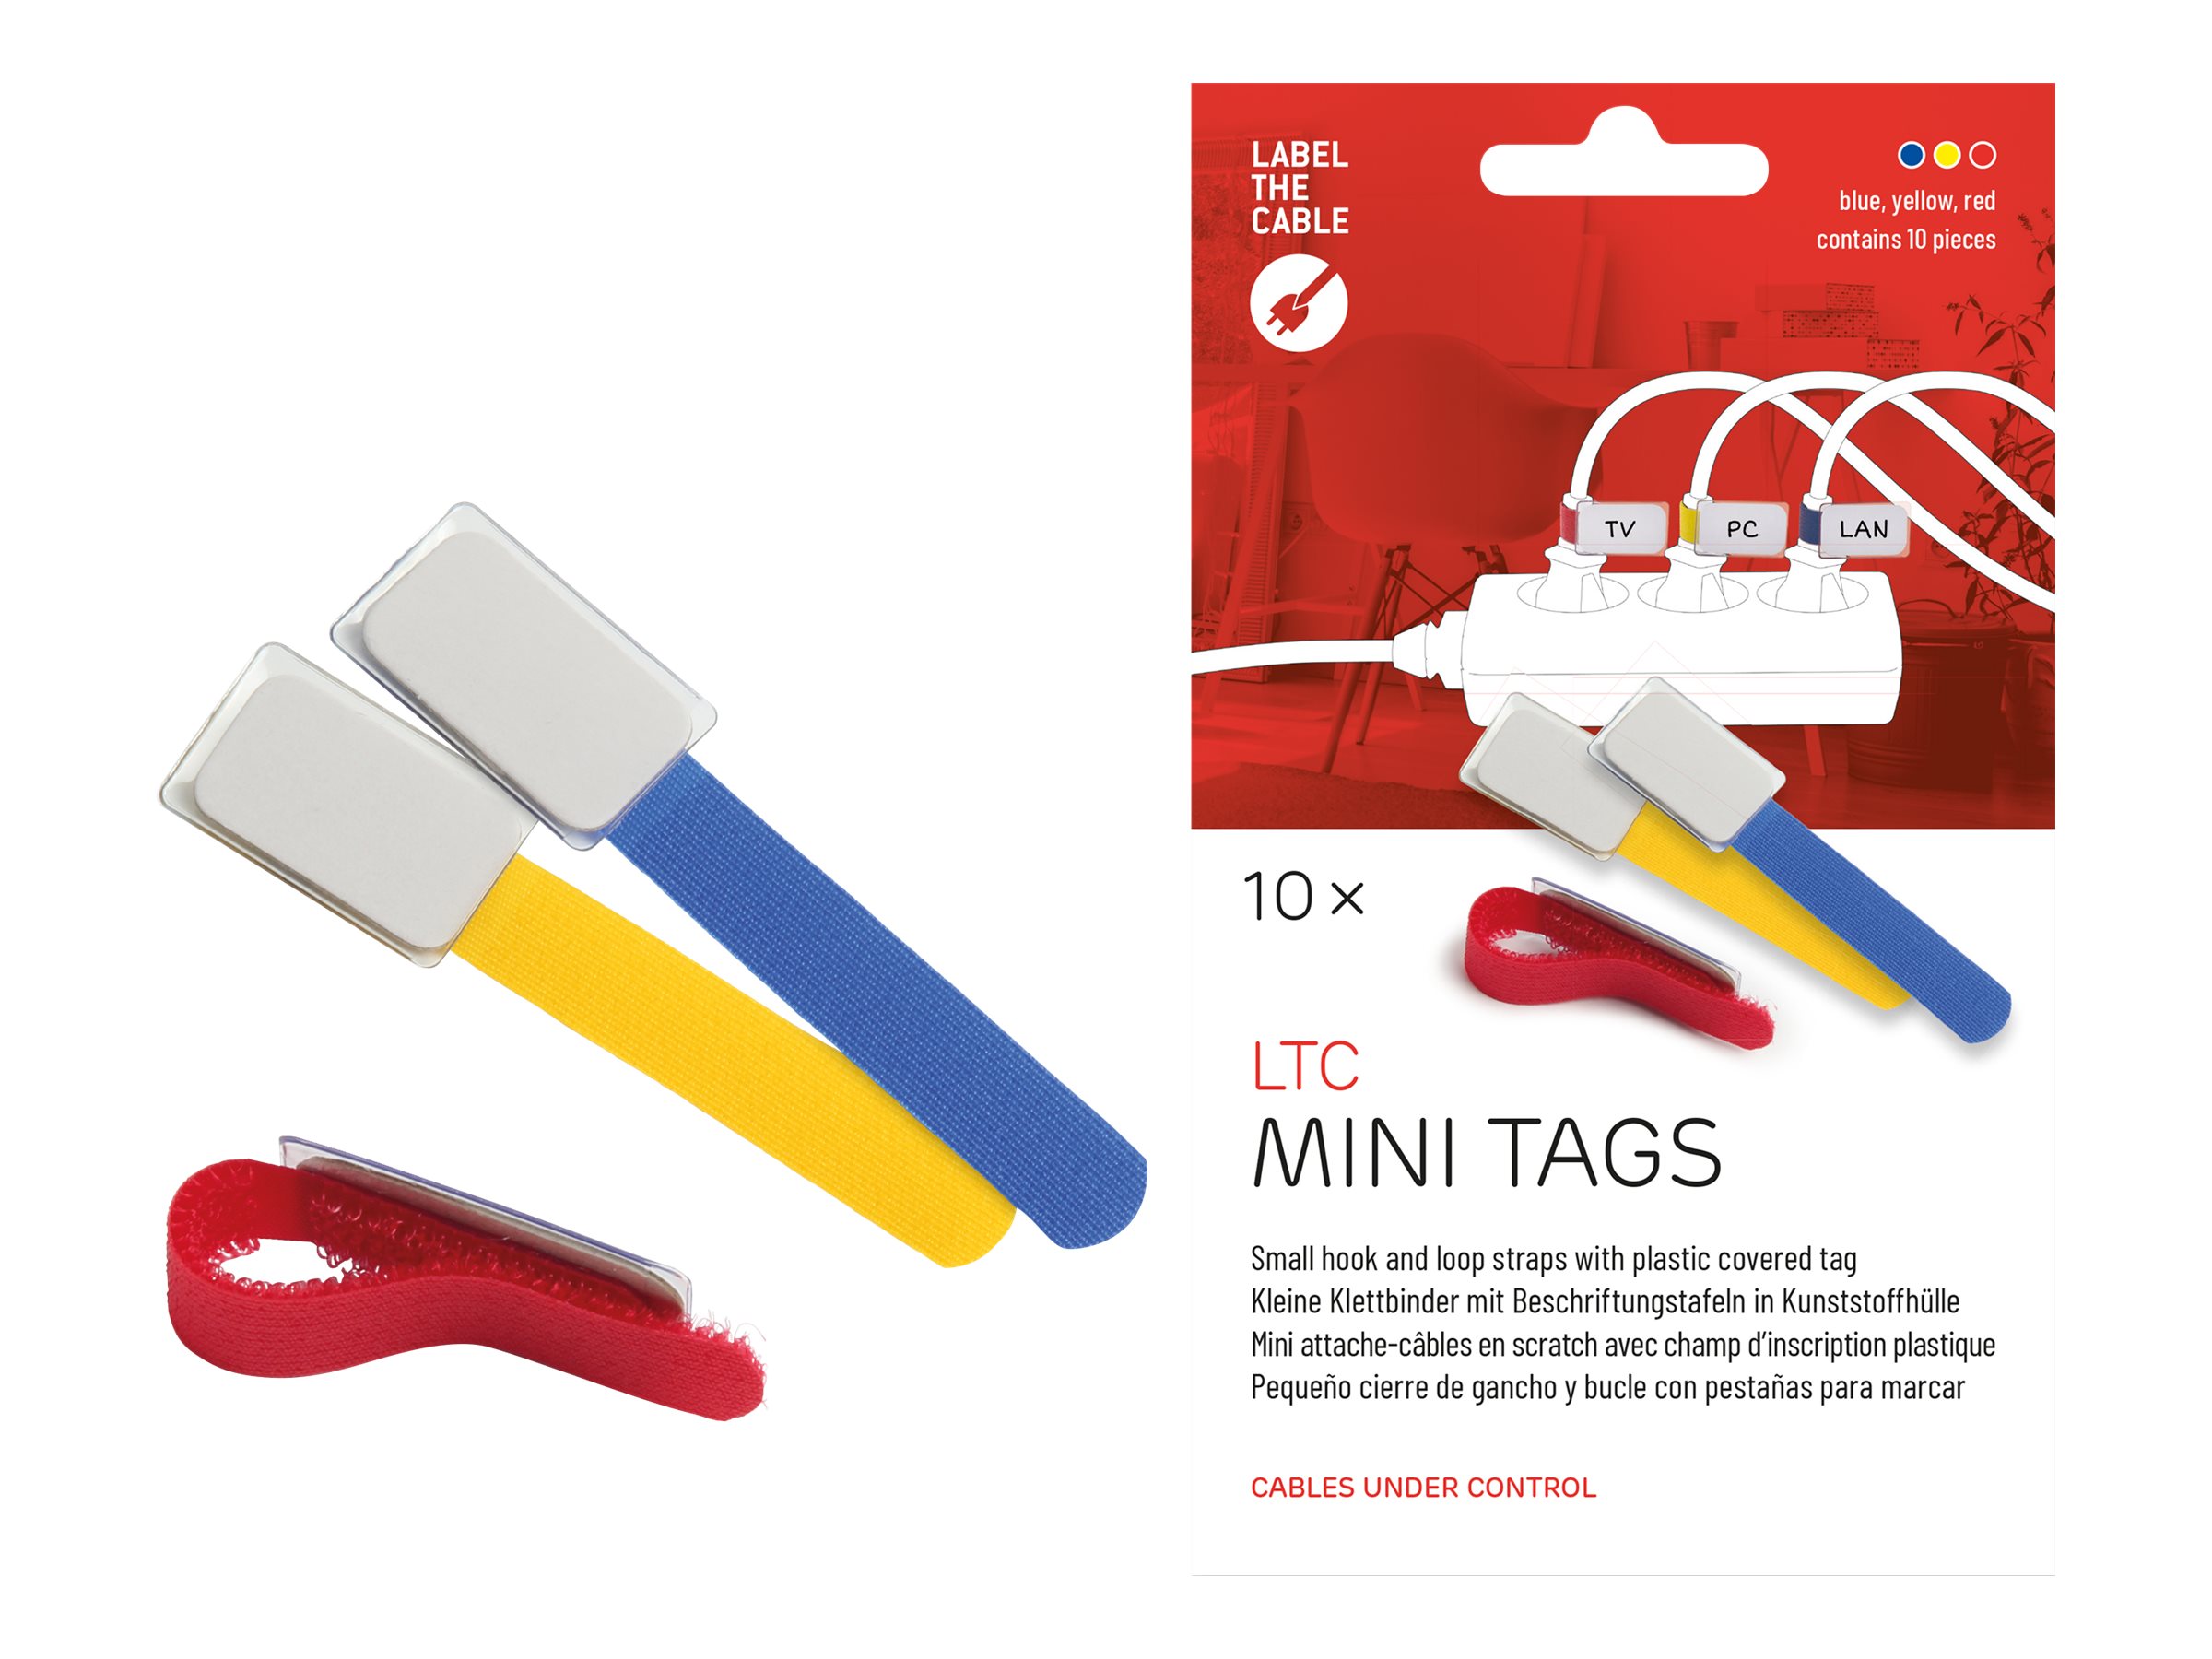 Label-the-cable LTC MINI TAGS - Draht-/Kabel-Marker - 9 cm - Blau, Gelb, Rot (Packung mit 10)